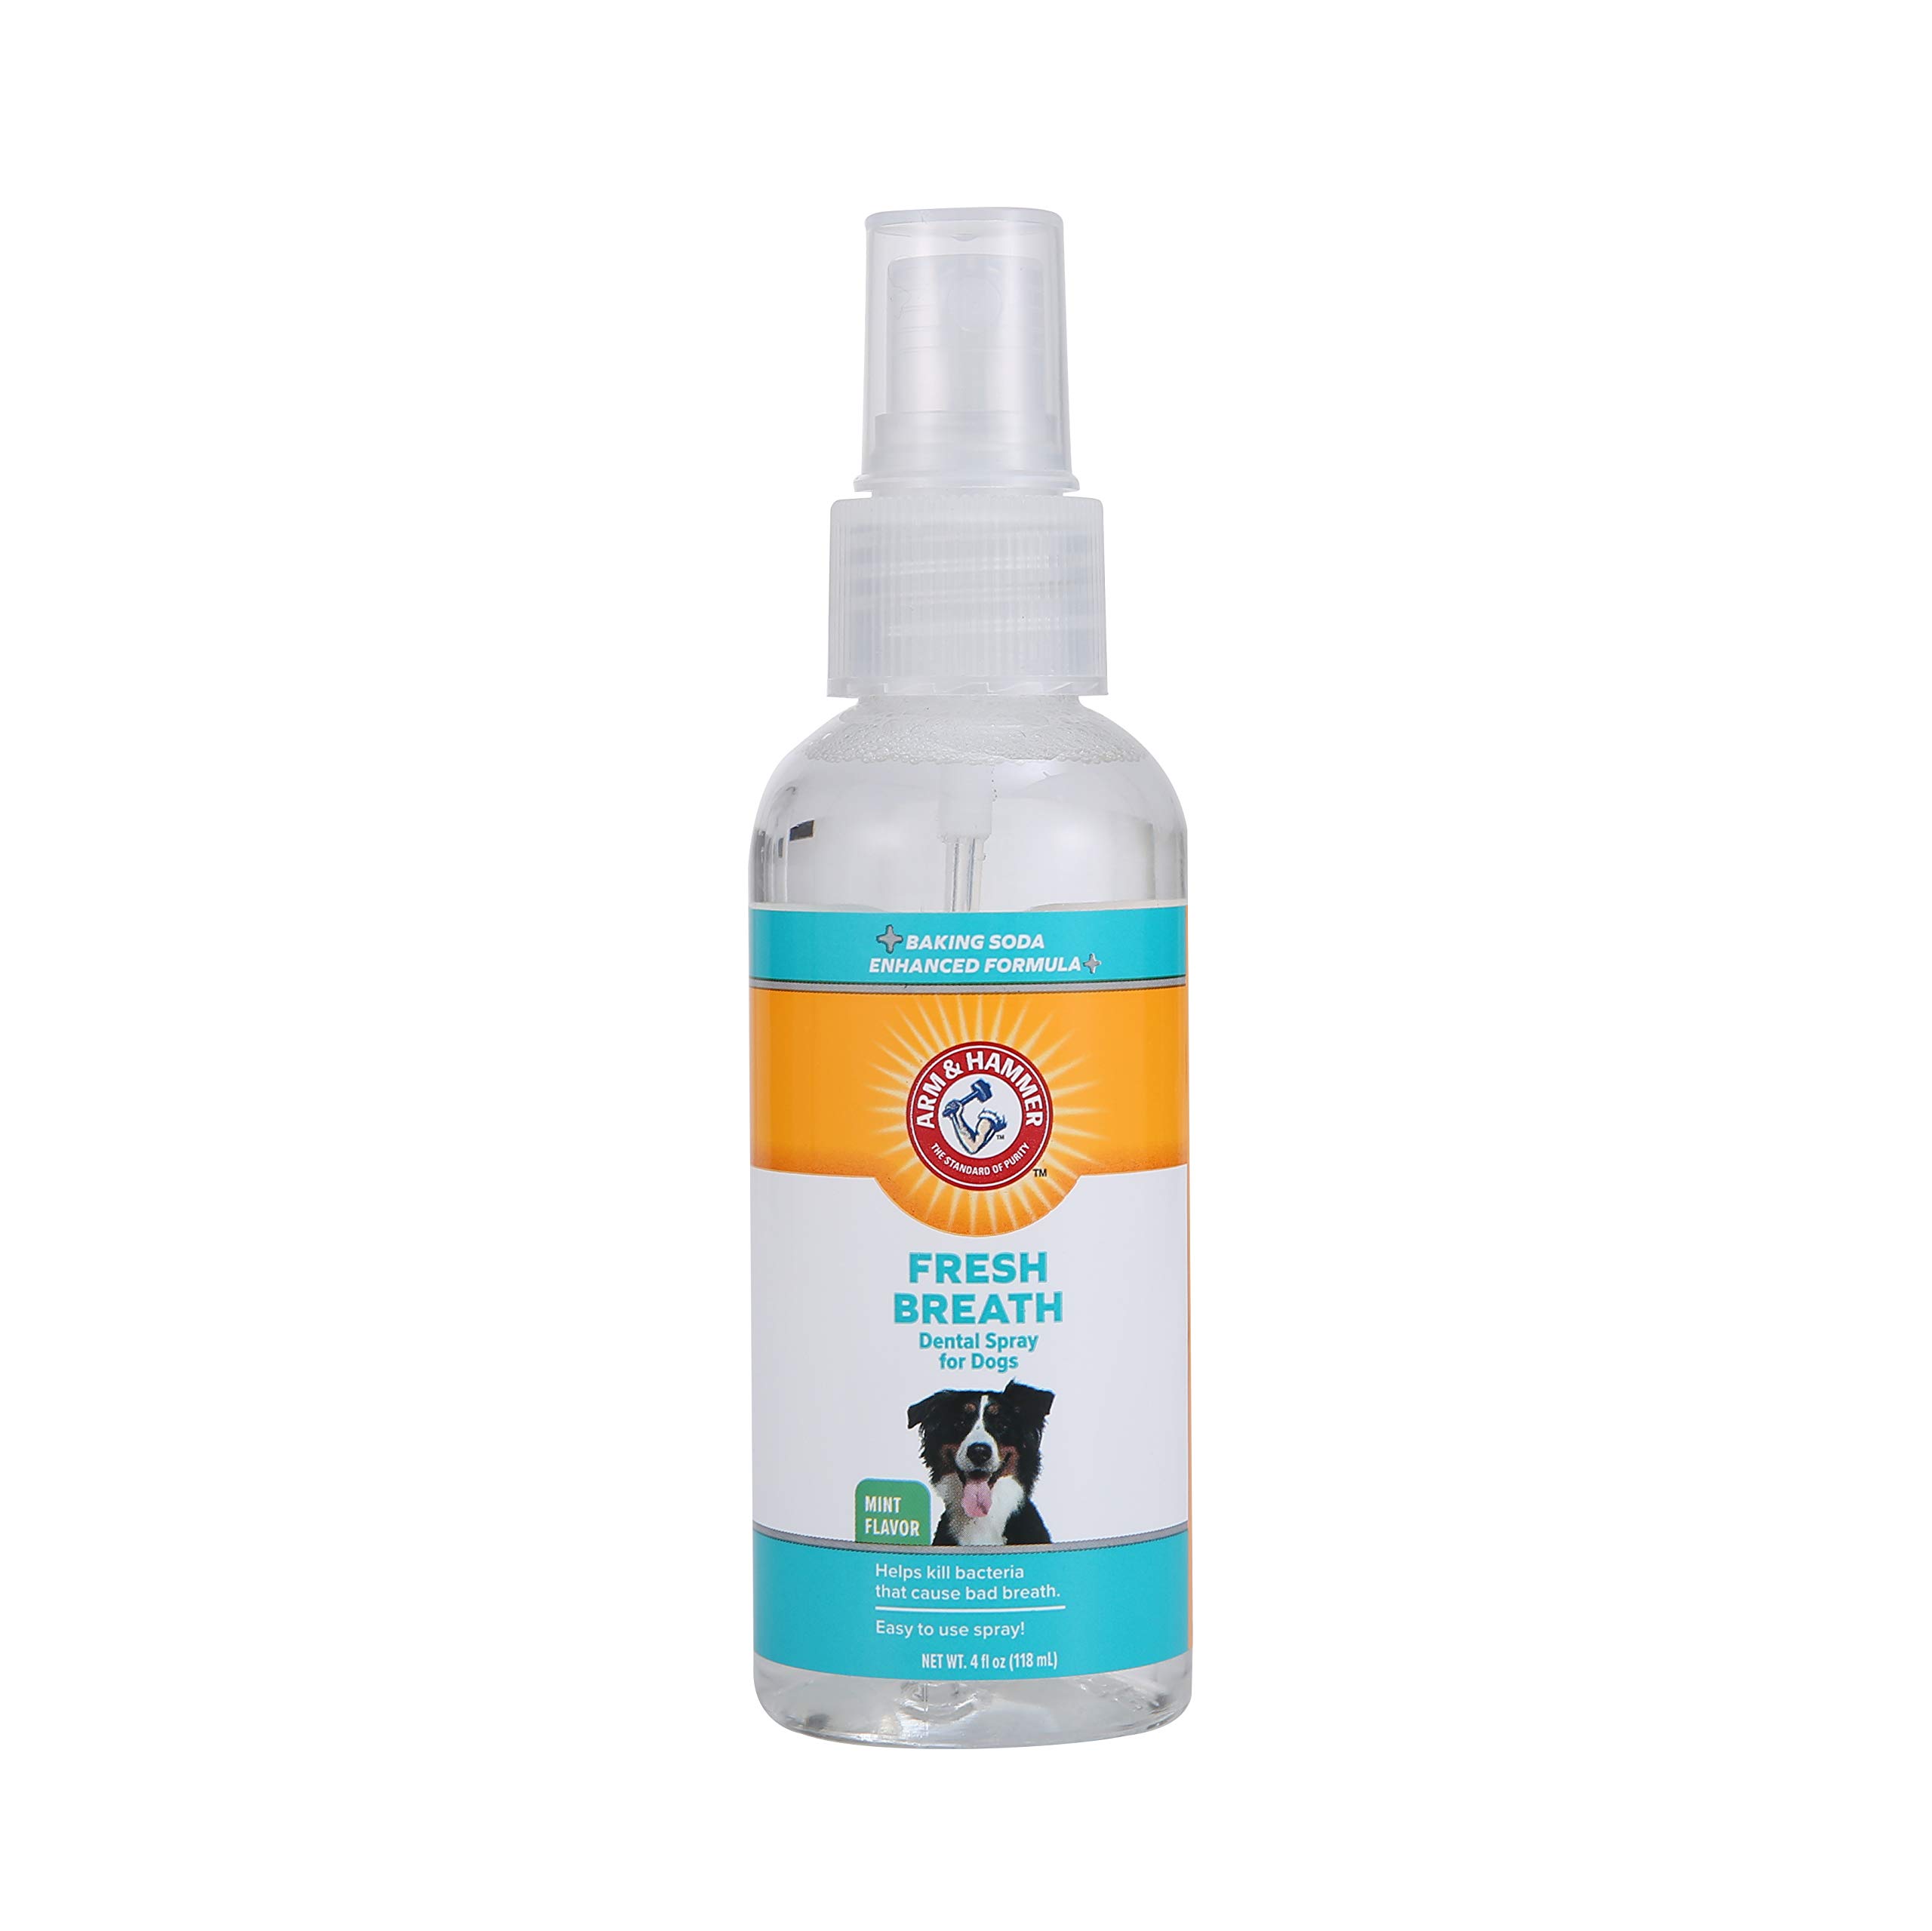 Book Cover Arm & Hammer for Pets Fresh Breath Dental Spray for Dogs | Reduce Plaque & Tartar Buildup Without Brushing, 4 Ounces, Mint Flavor | Dog Teeth Cleaning Spray, Arm and Hammer Dog Dental Care